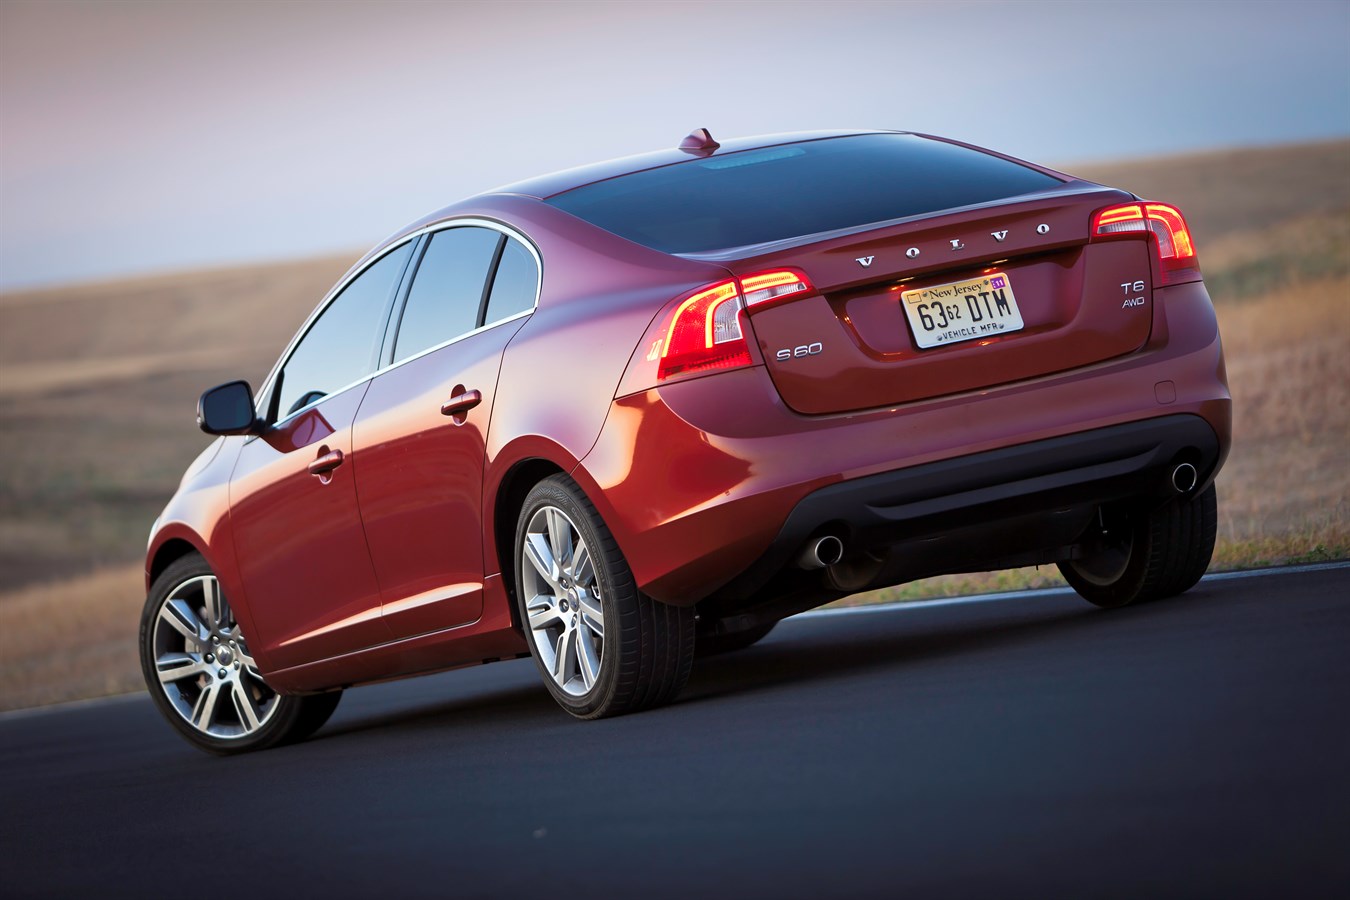 2011-12 Volvo S60 Earns Top Safety Pick from IIHS - Volvo Car USA Newsroom